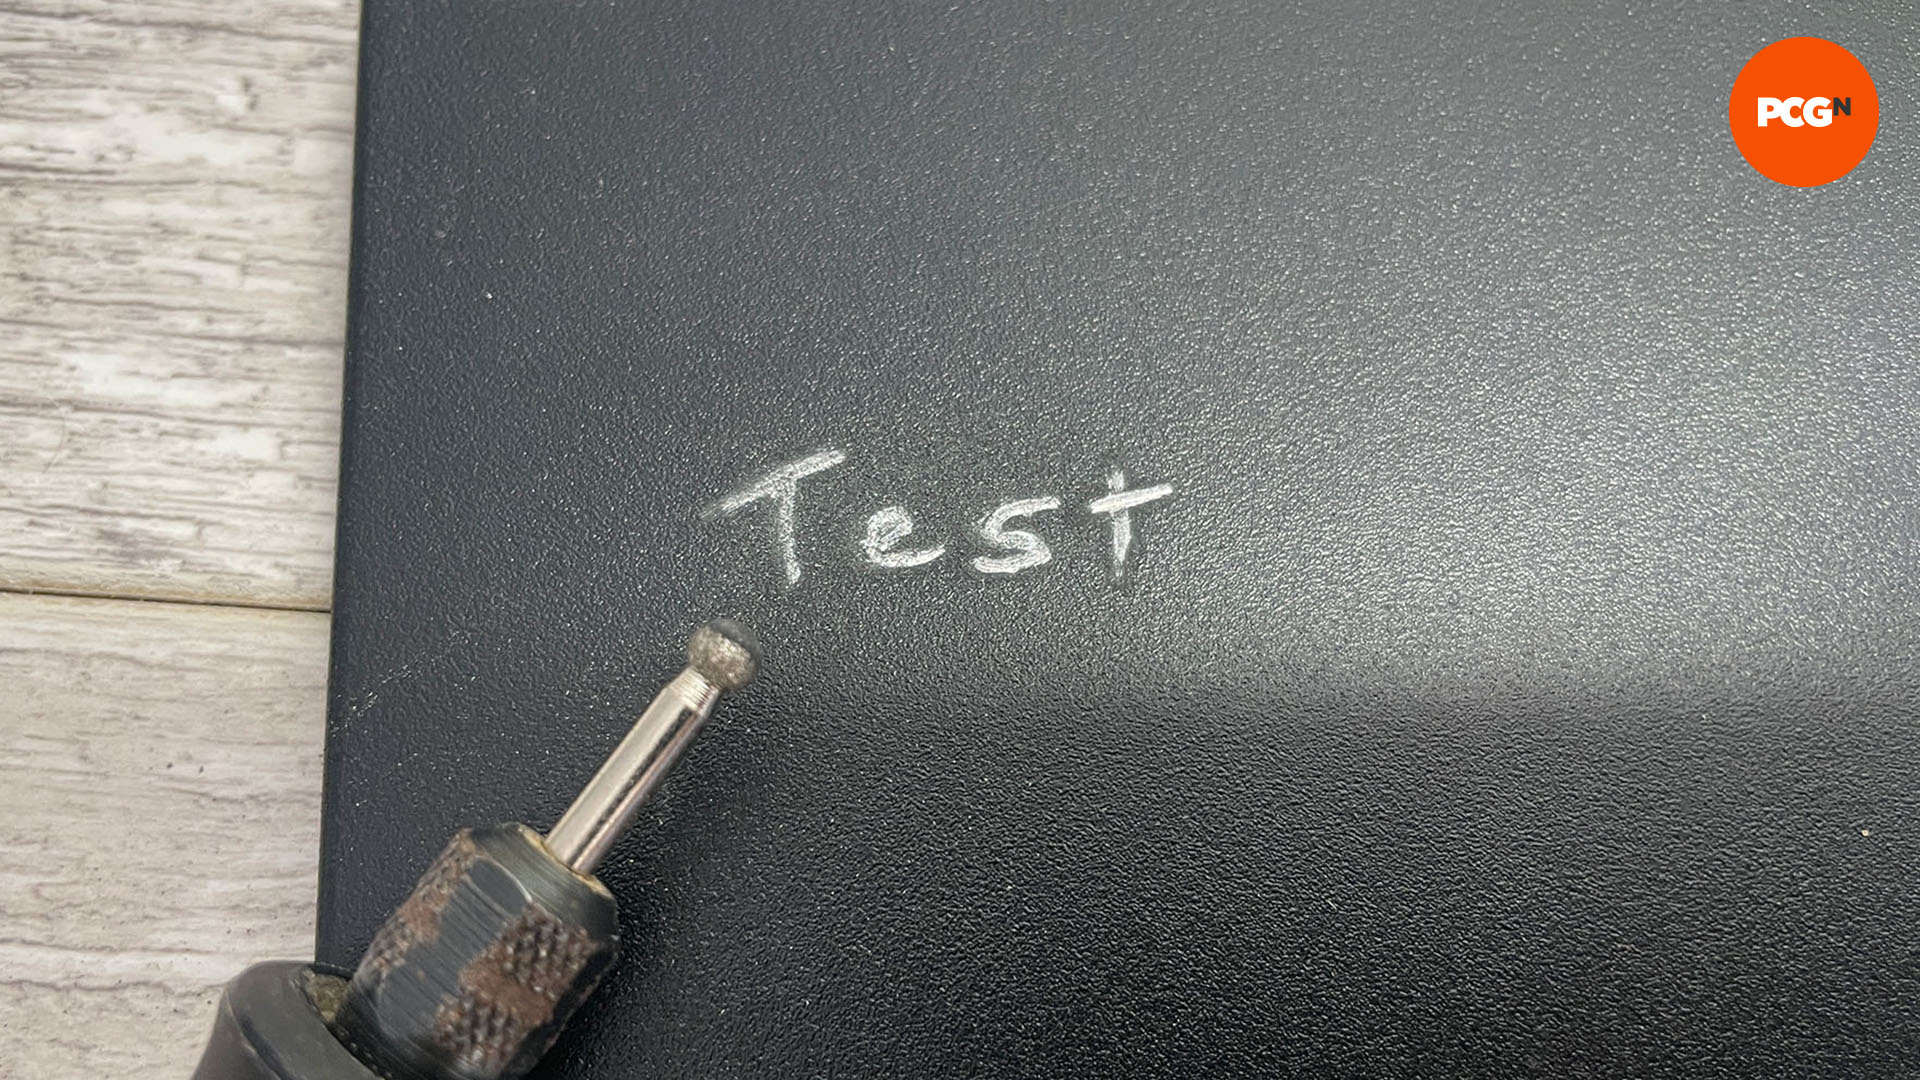 How to engrave your PC case: Engraving test on hidden section